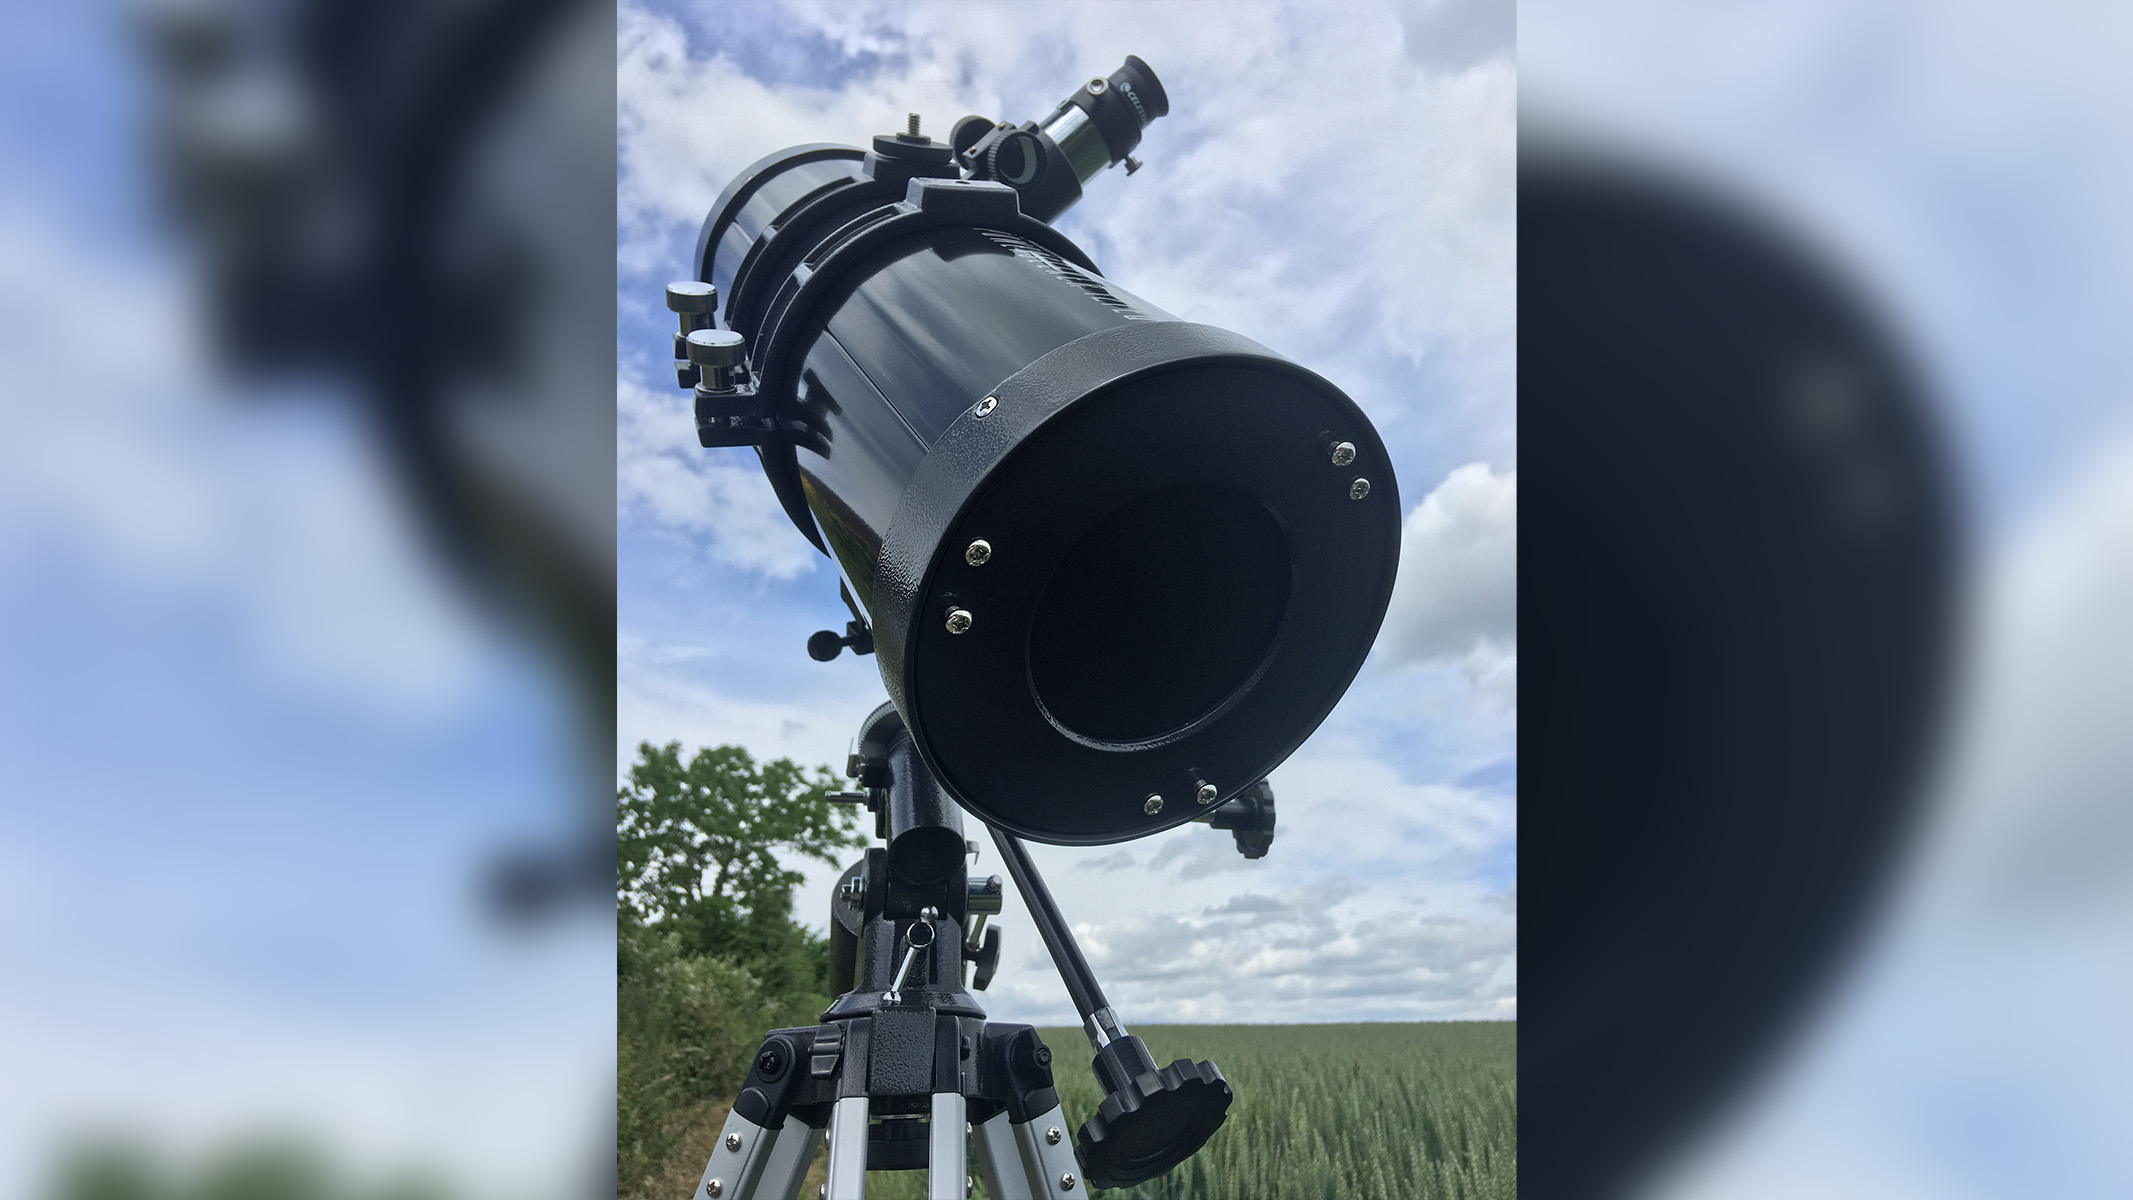 Image shows the end of the Celestron Powerseeker 127EQ telescope